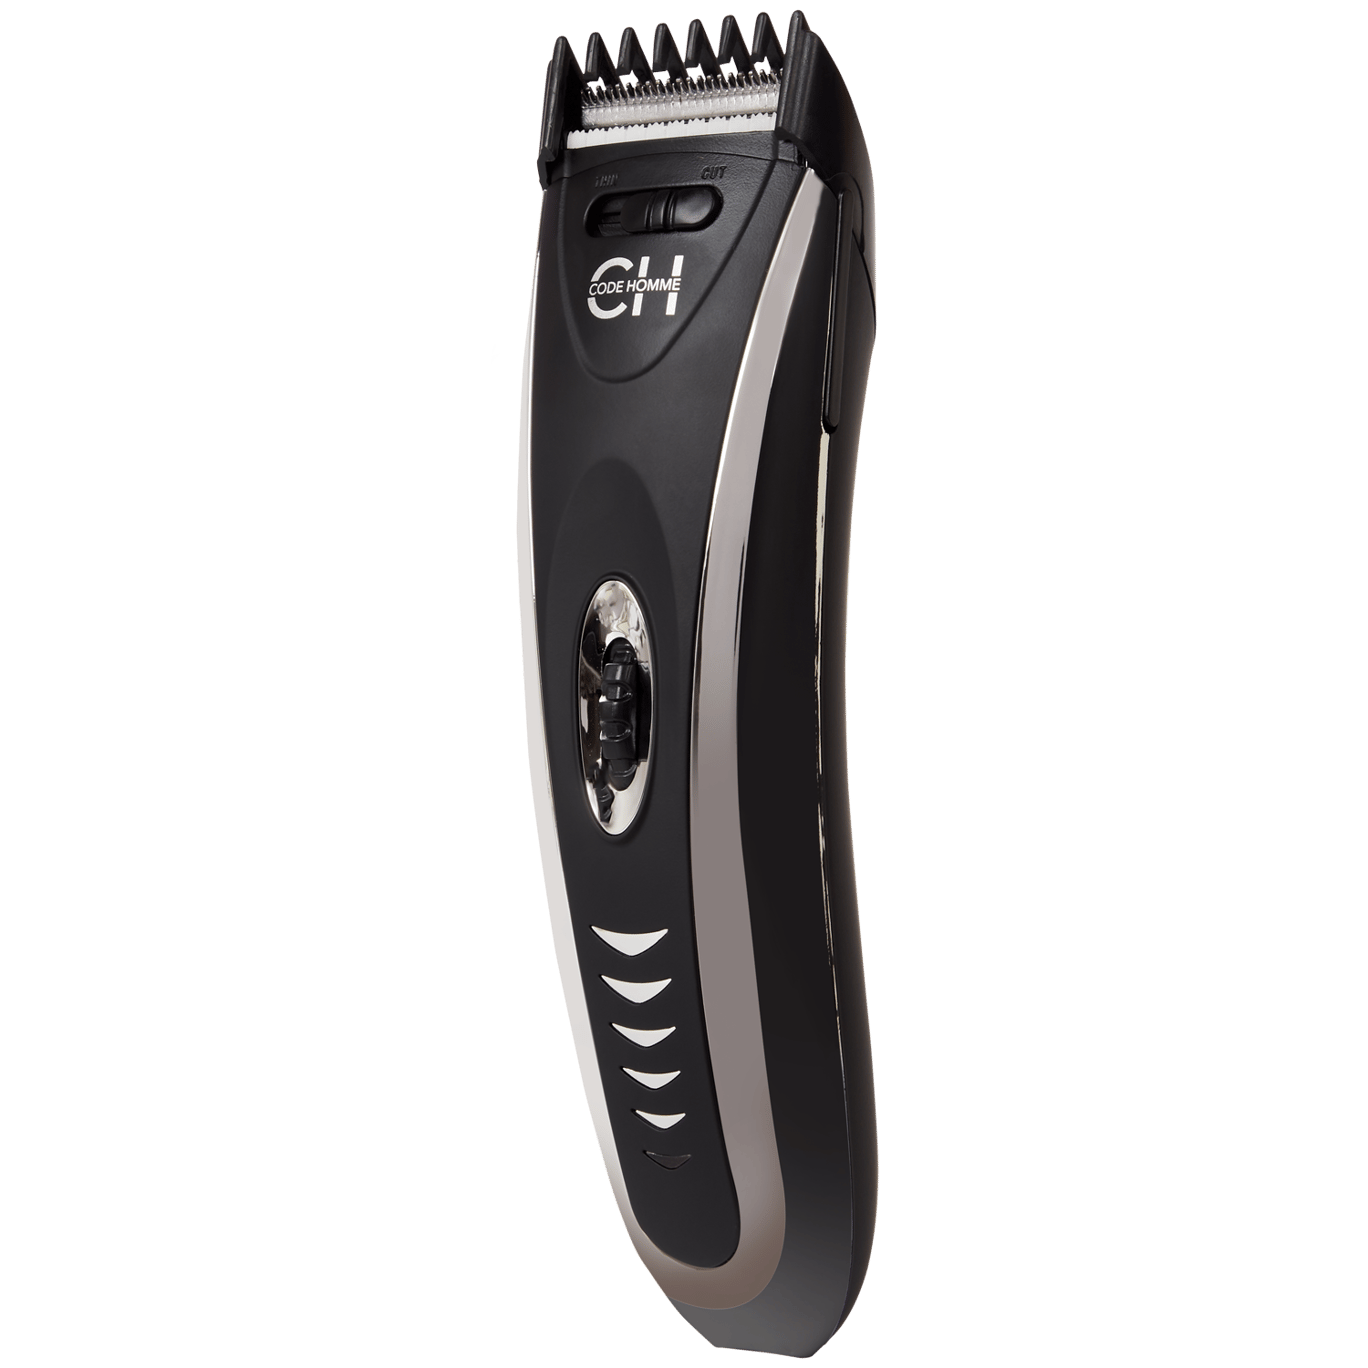 haircut with a beard trimmer